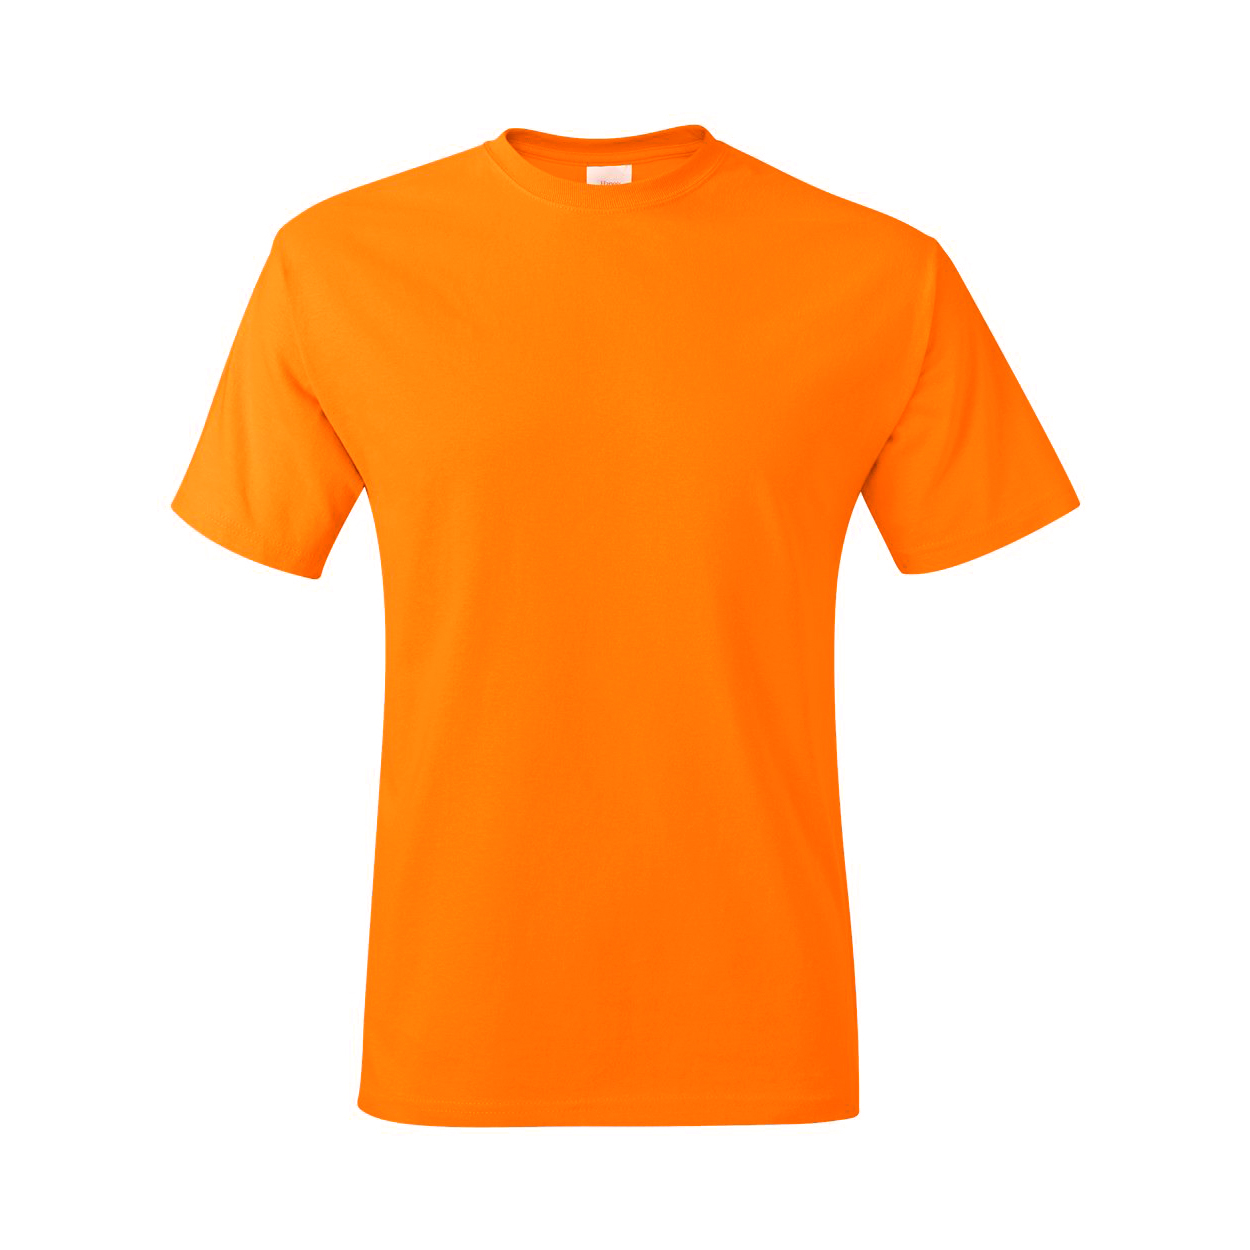 SHORT SLEEVE T-SHIRT – Best Value - North American Safety